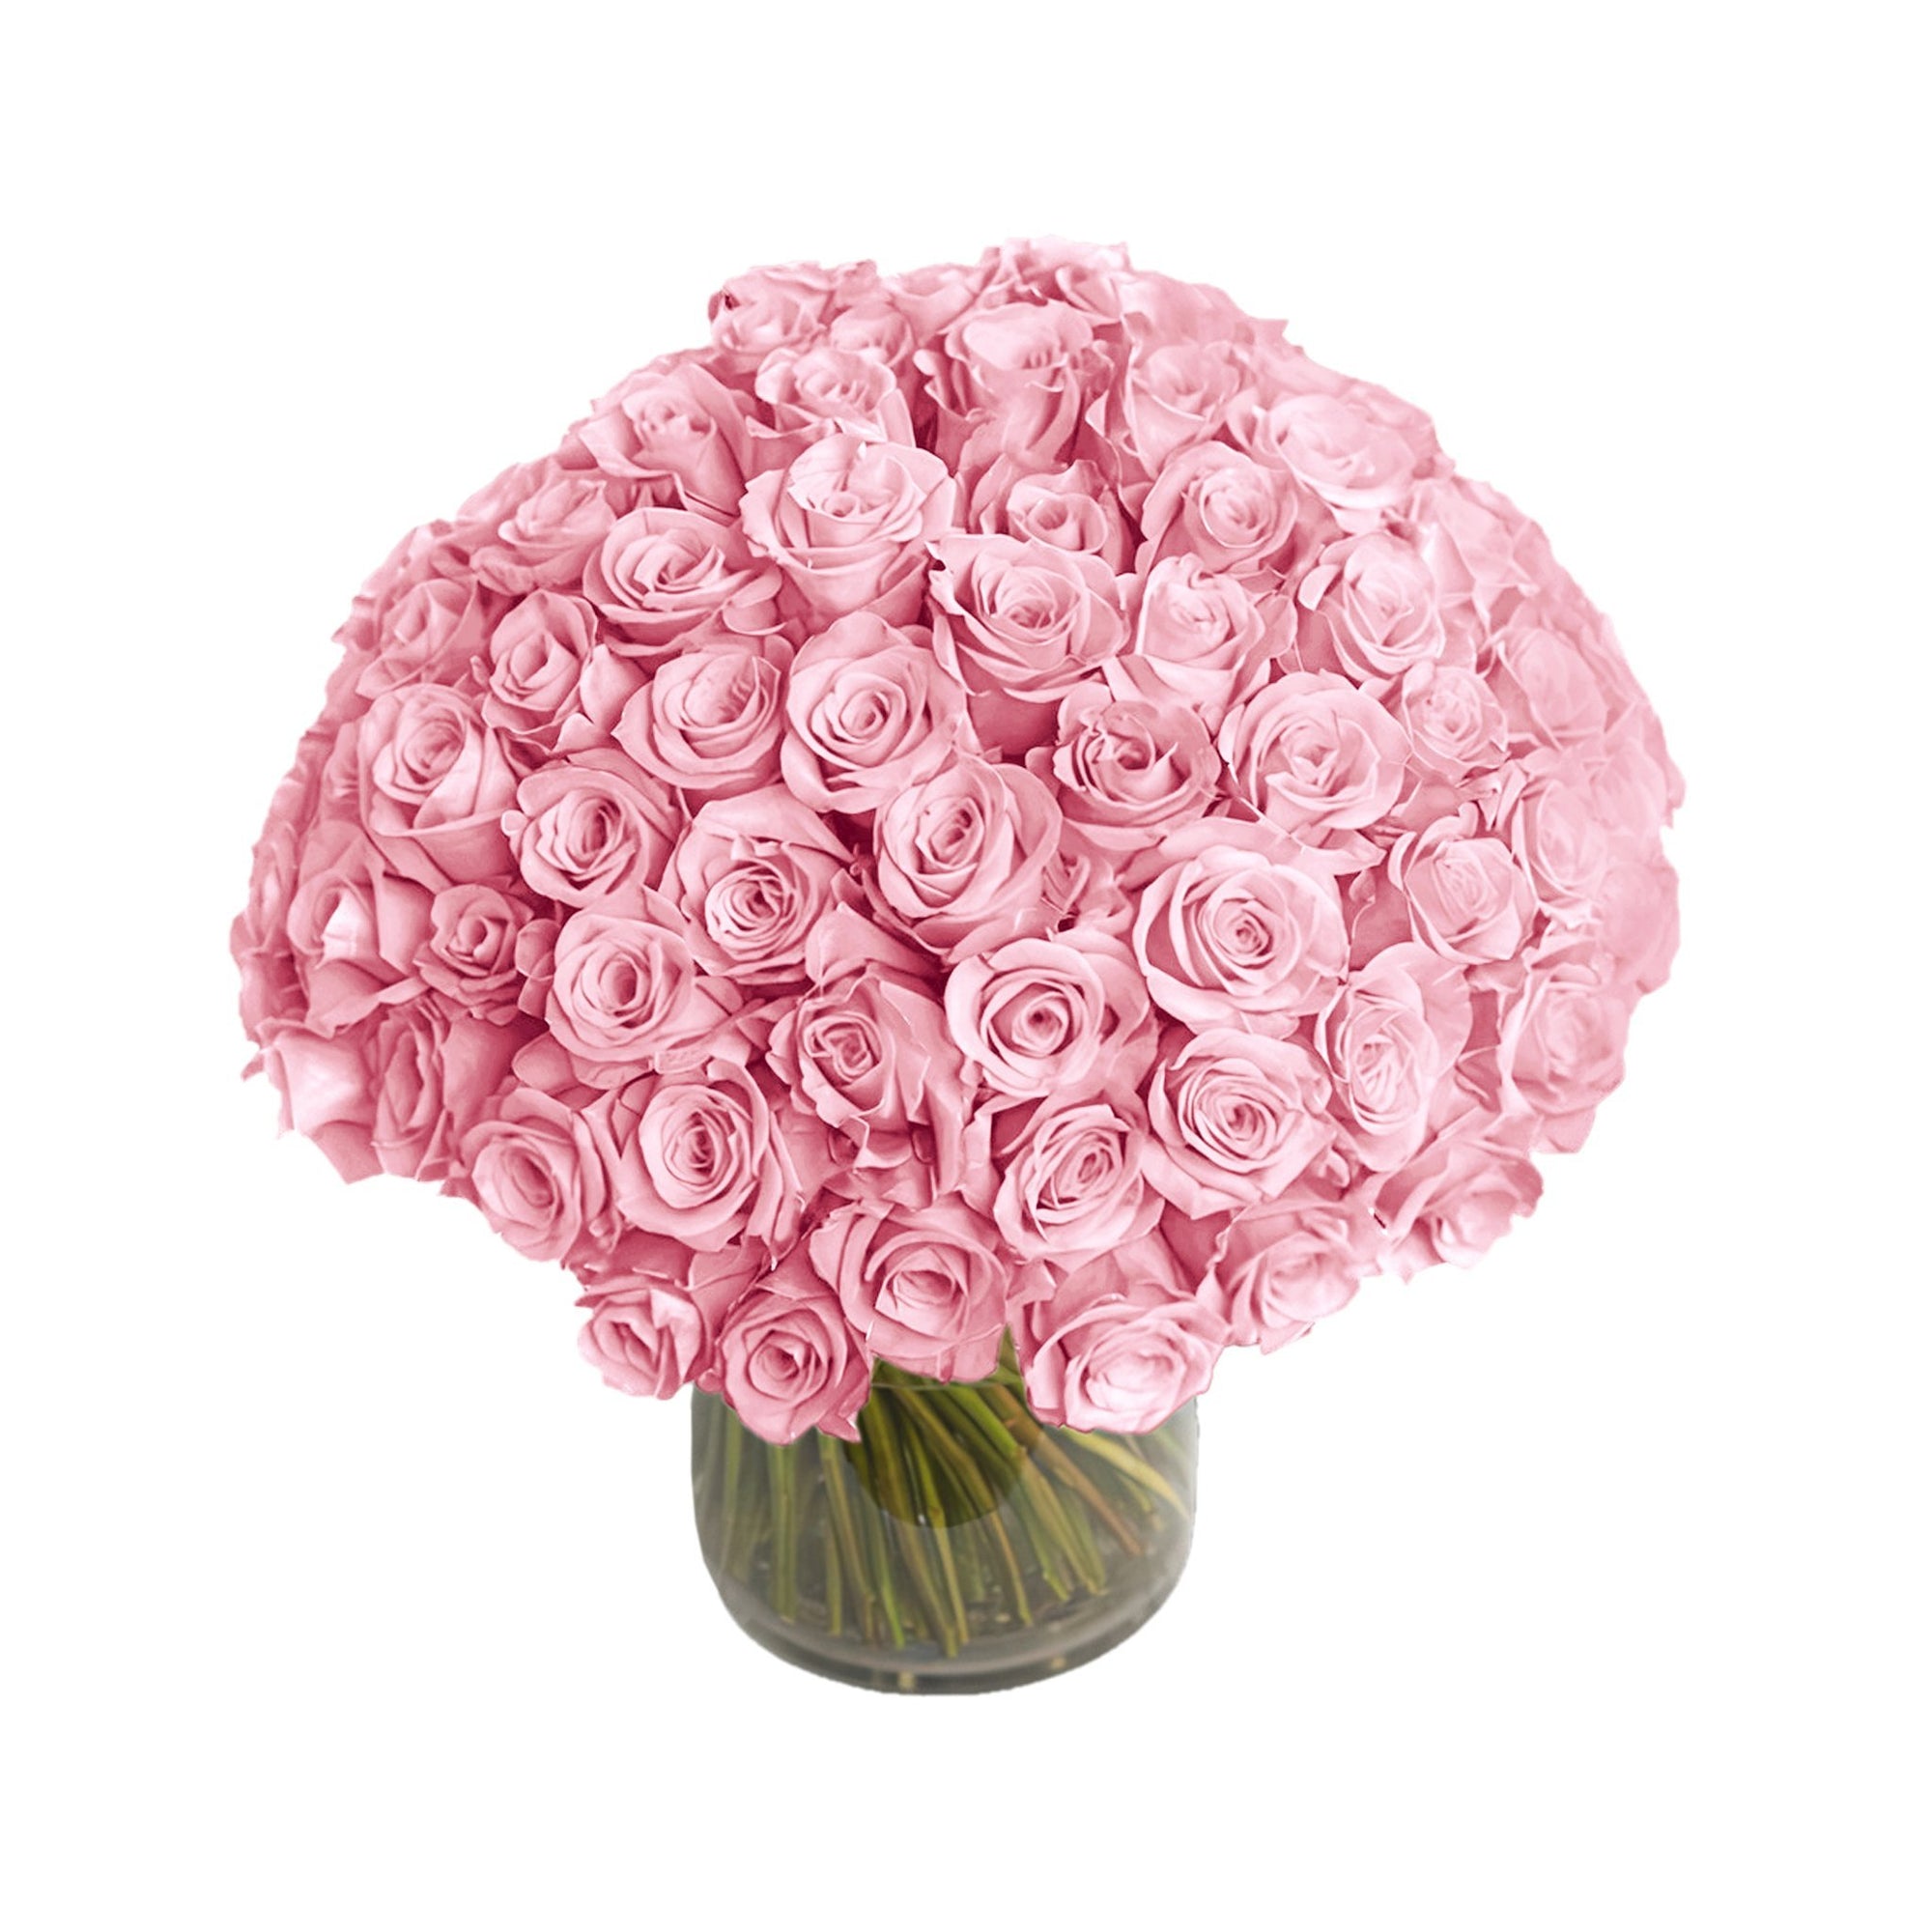 NYC Flower Delivery - Fresh Roses in a Vase | 100 Light Pink Roses - Roses